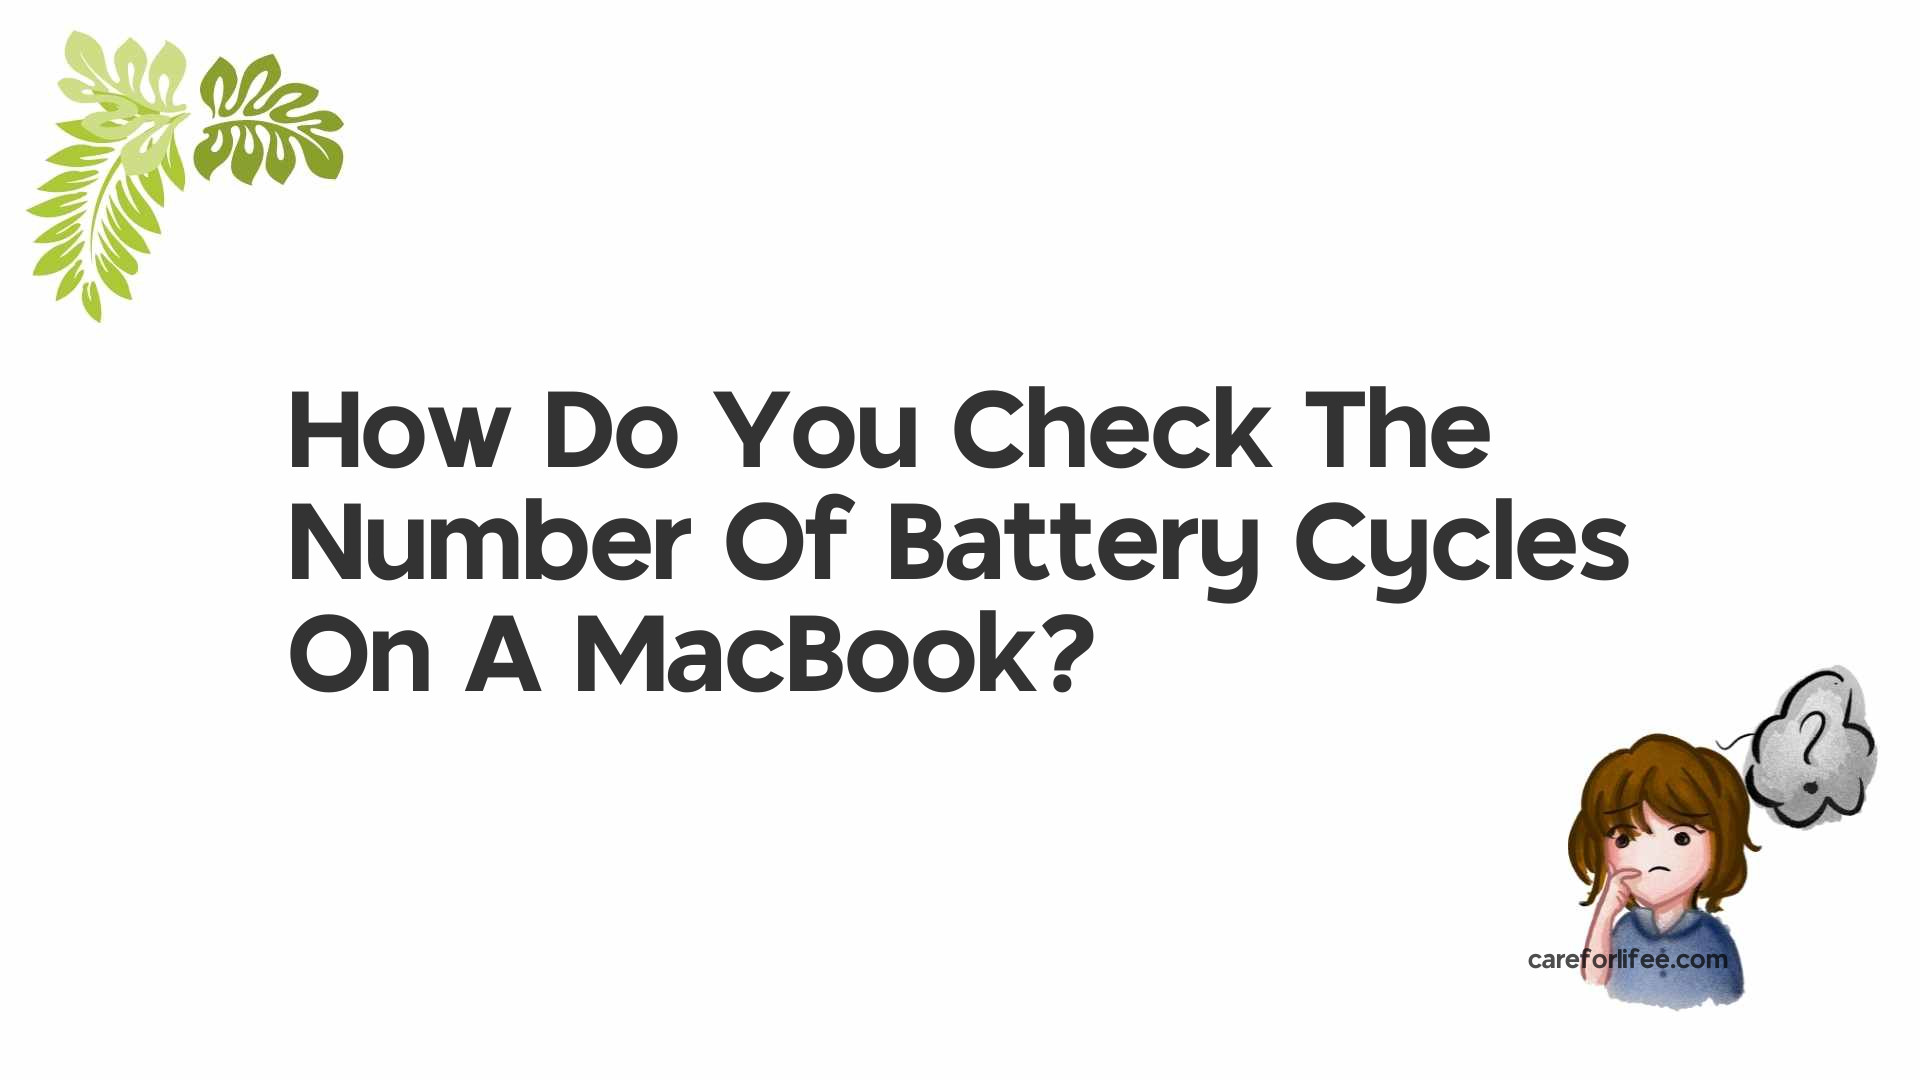 How Do You Check The Number Of Battery Cycles On A MacBook?